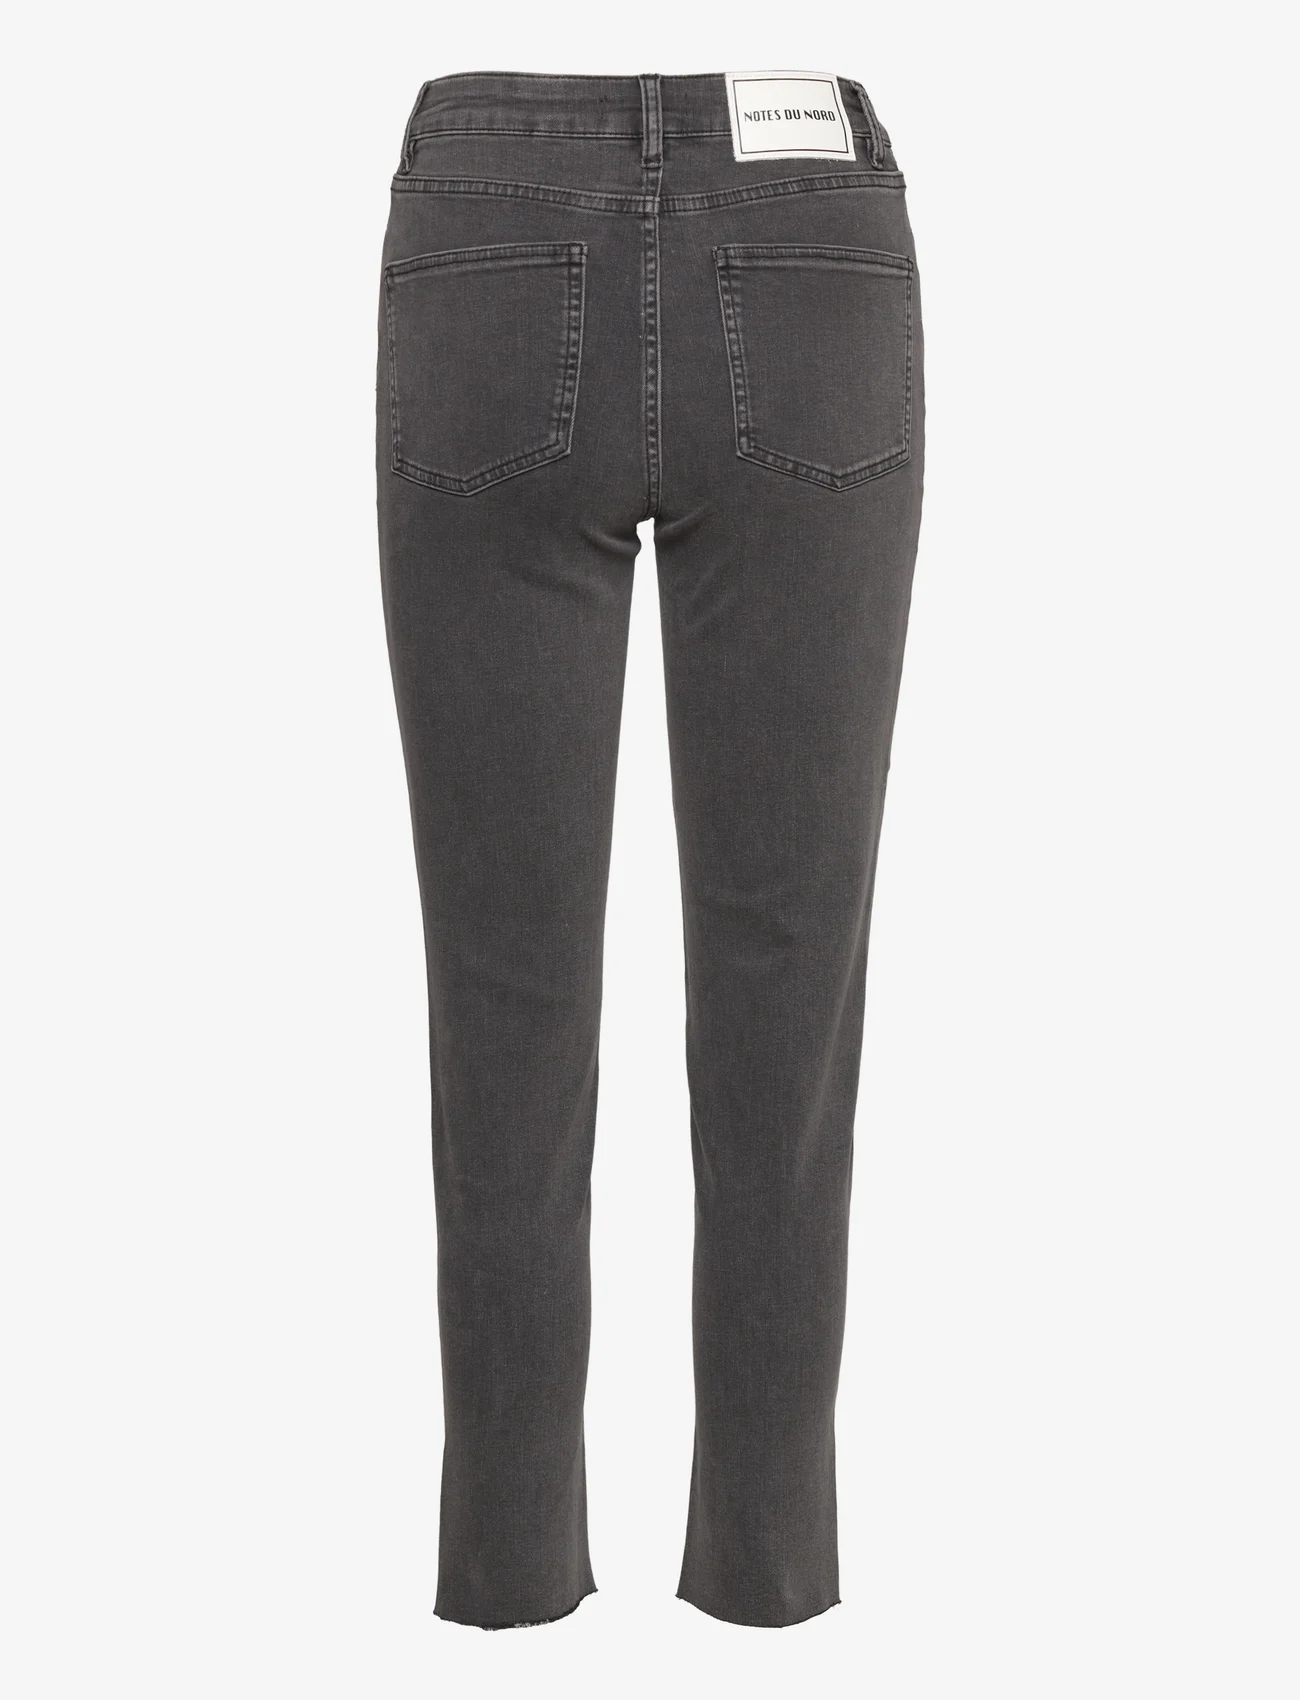 Notes du Nord - Diana Jeans - straight jeans - grey wash - 1